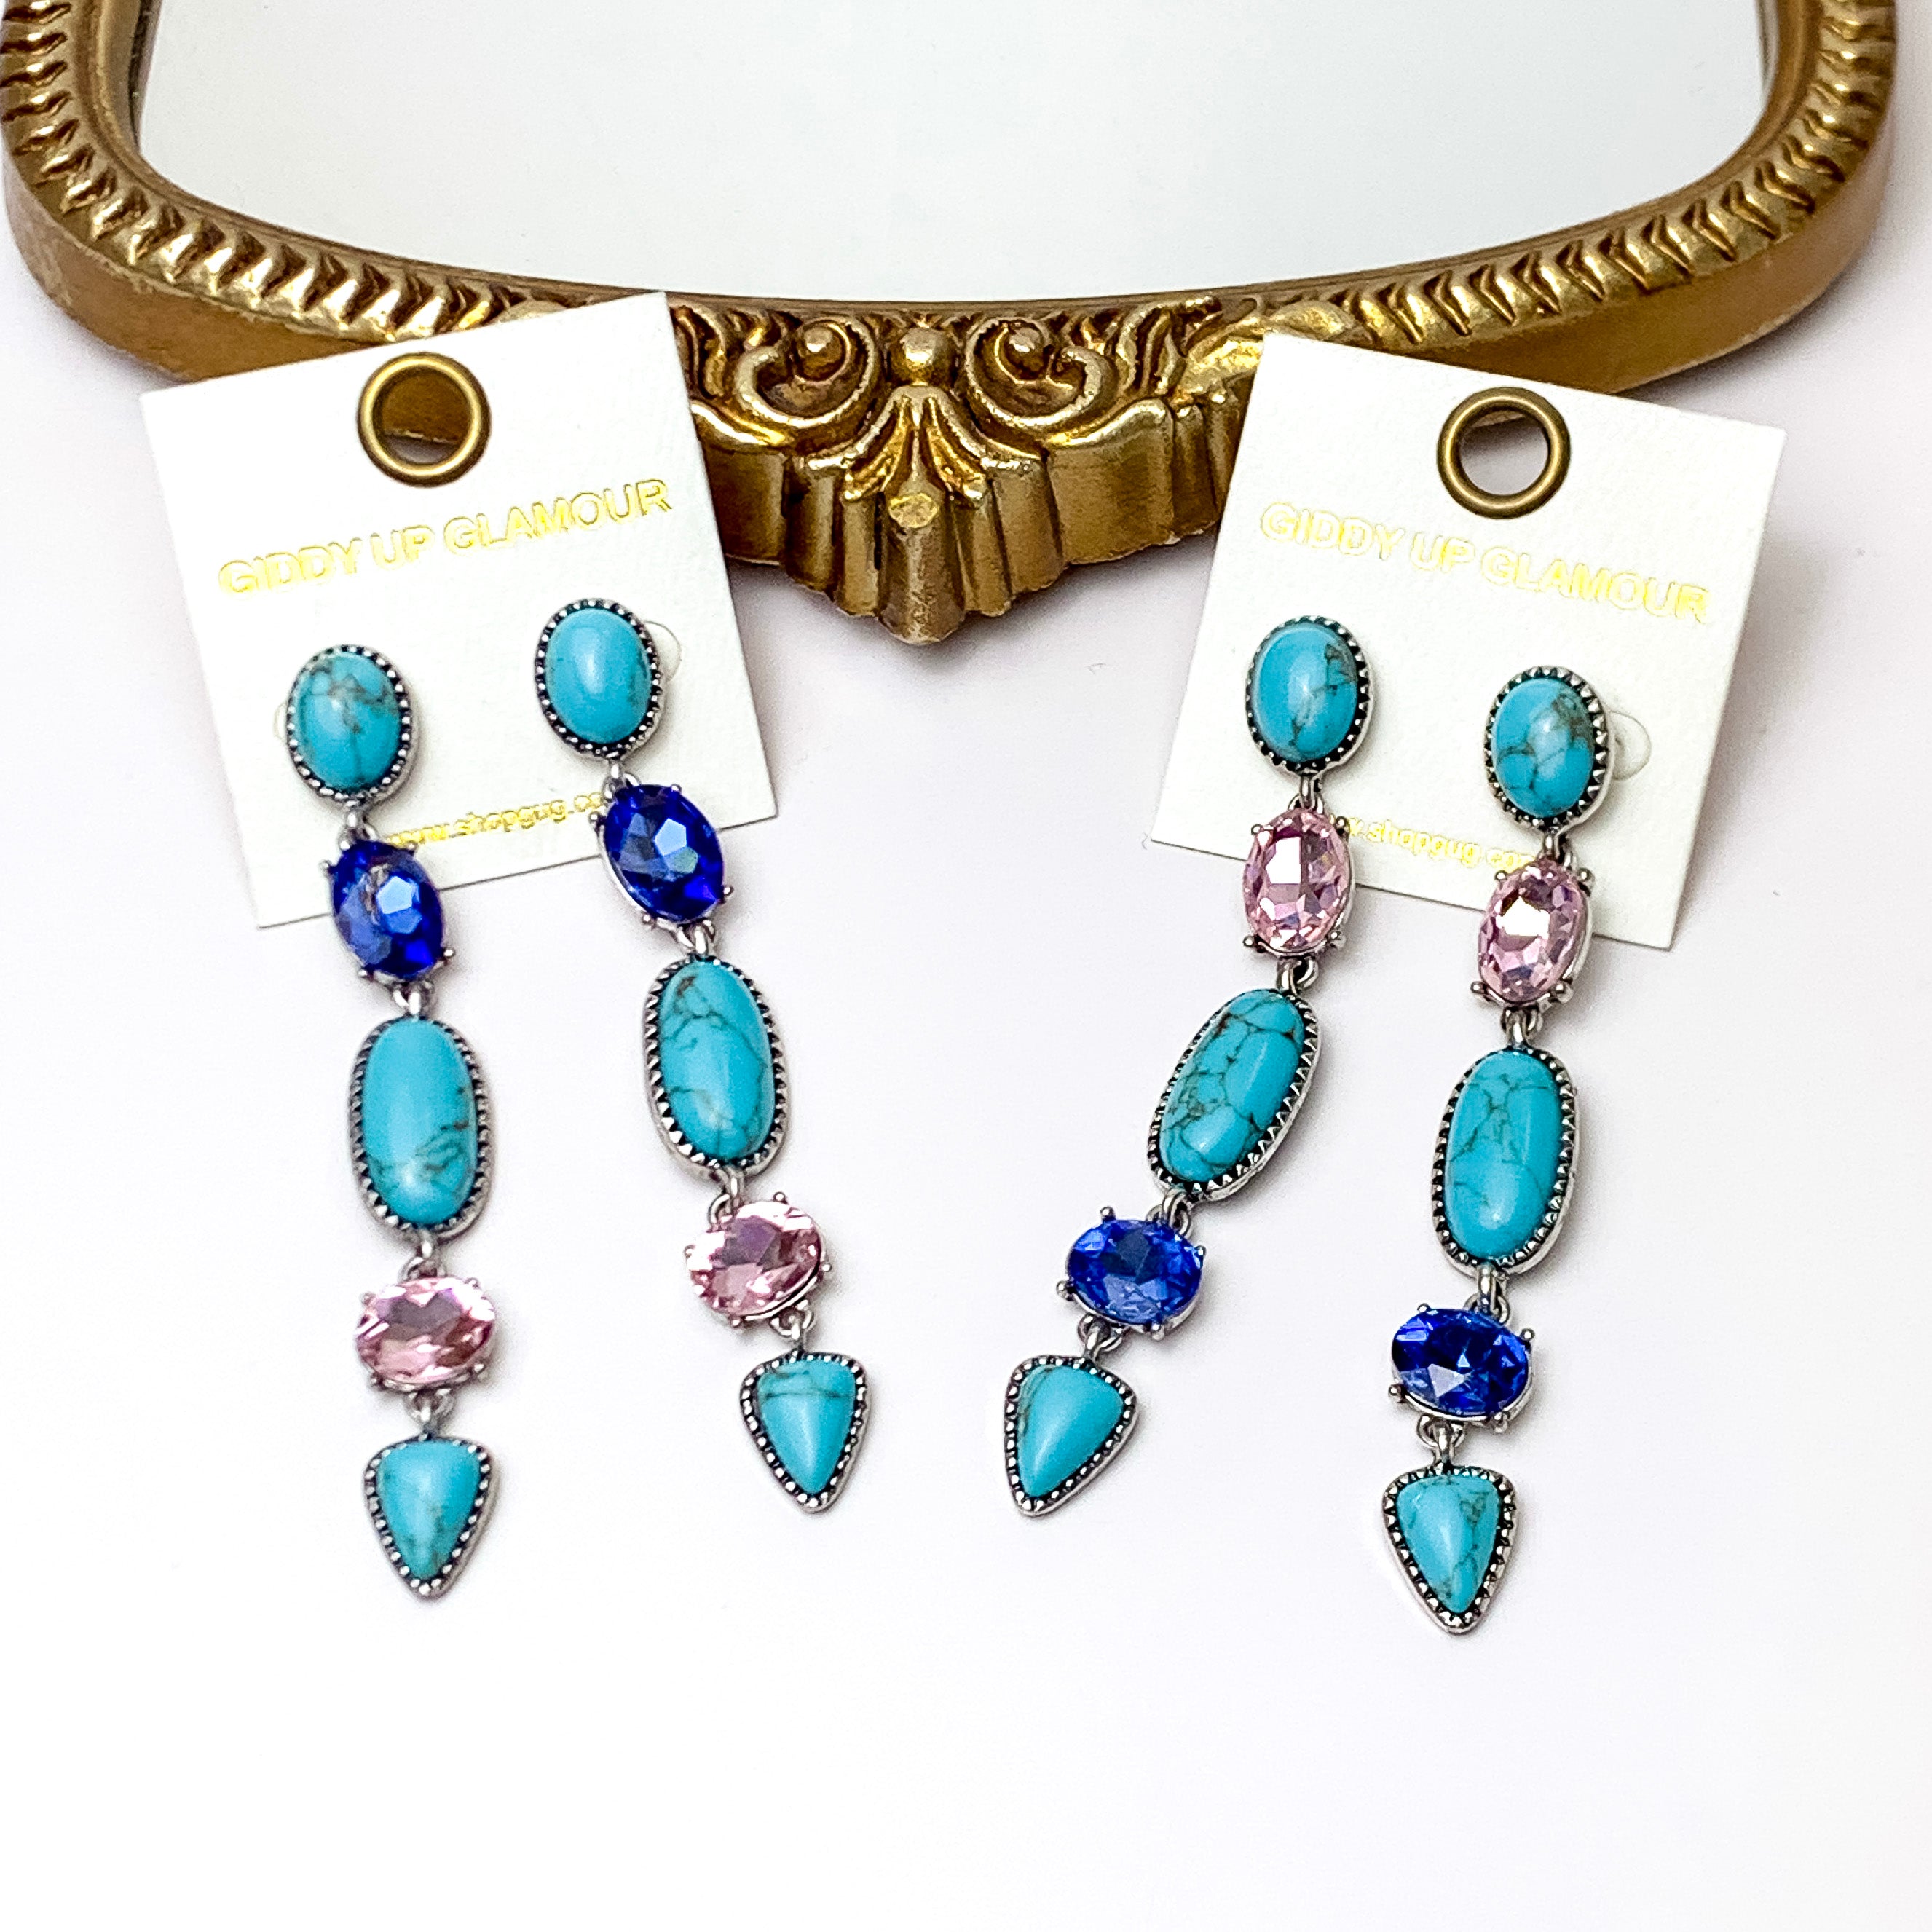 5 Tier Faux Turquoise Stone and Light Pink and Blue Crystal Dangle Earrings - Giddy Up Glamour Boutique